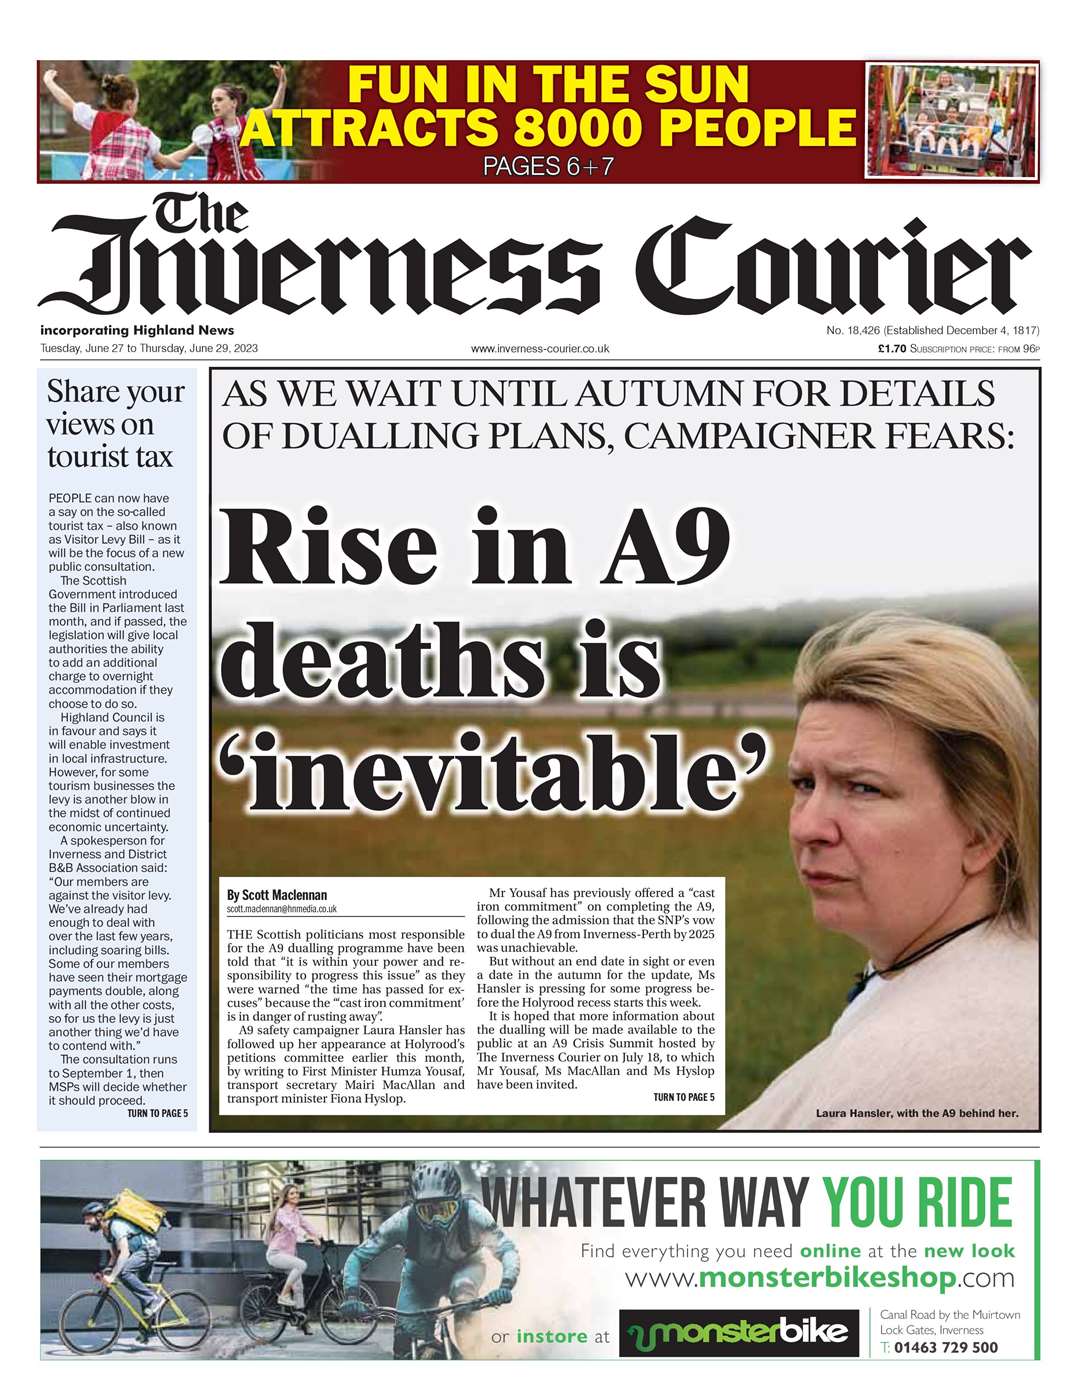 The Inverness Courier, June 27, front page.